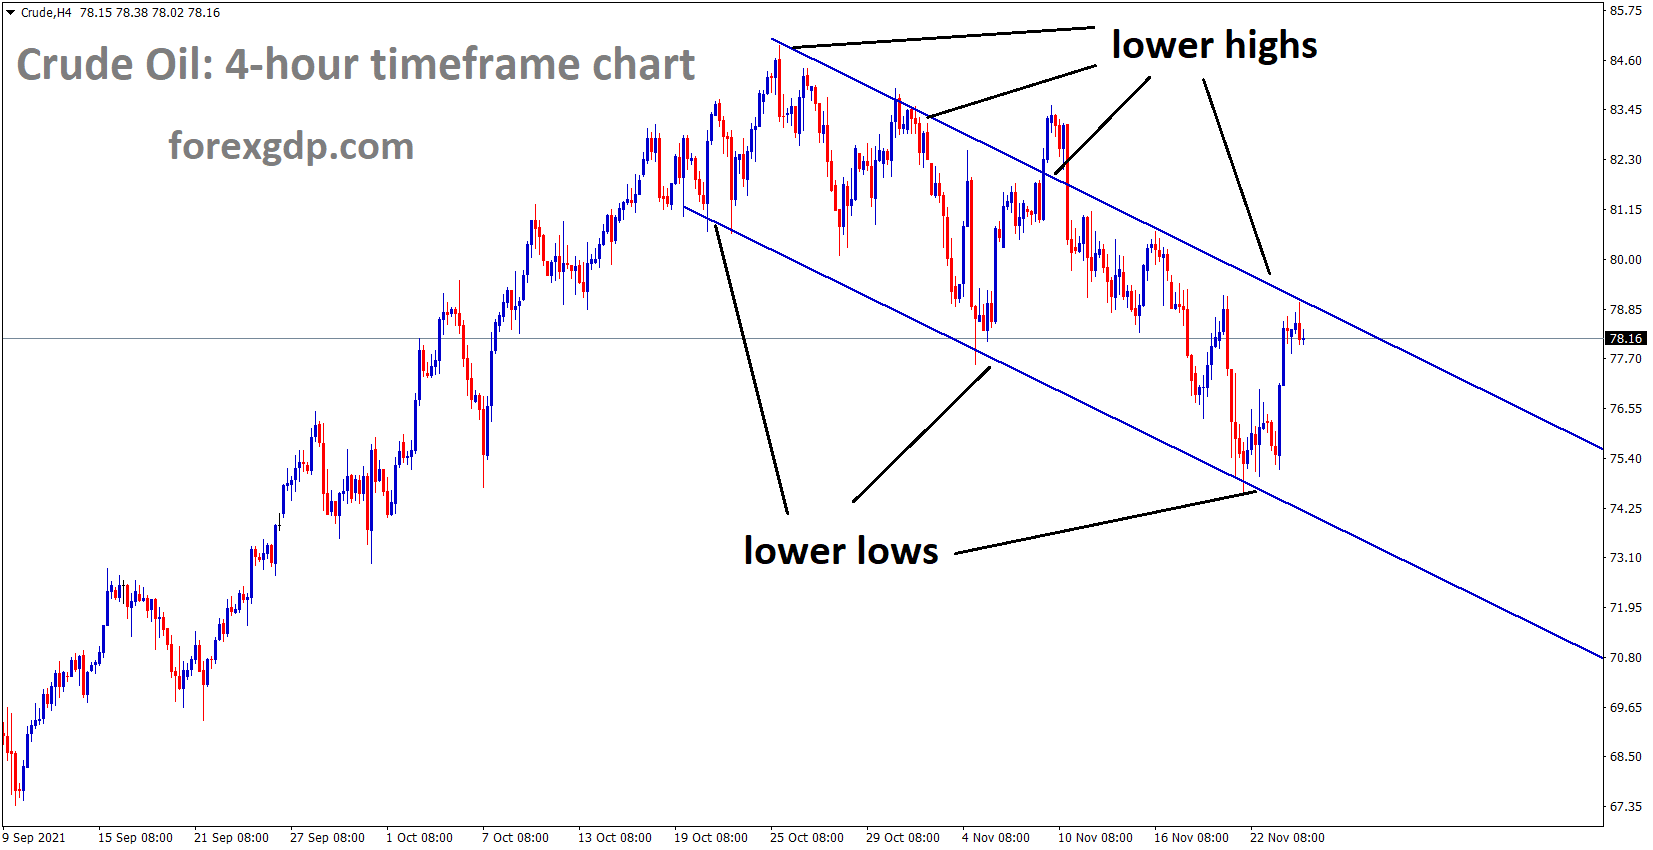 Crude oil is moving in the Descending channel and the market fell from the lower high area